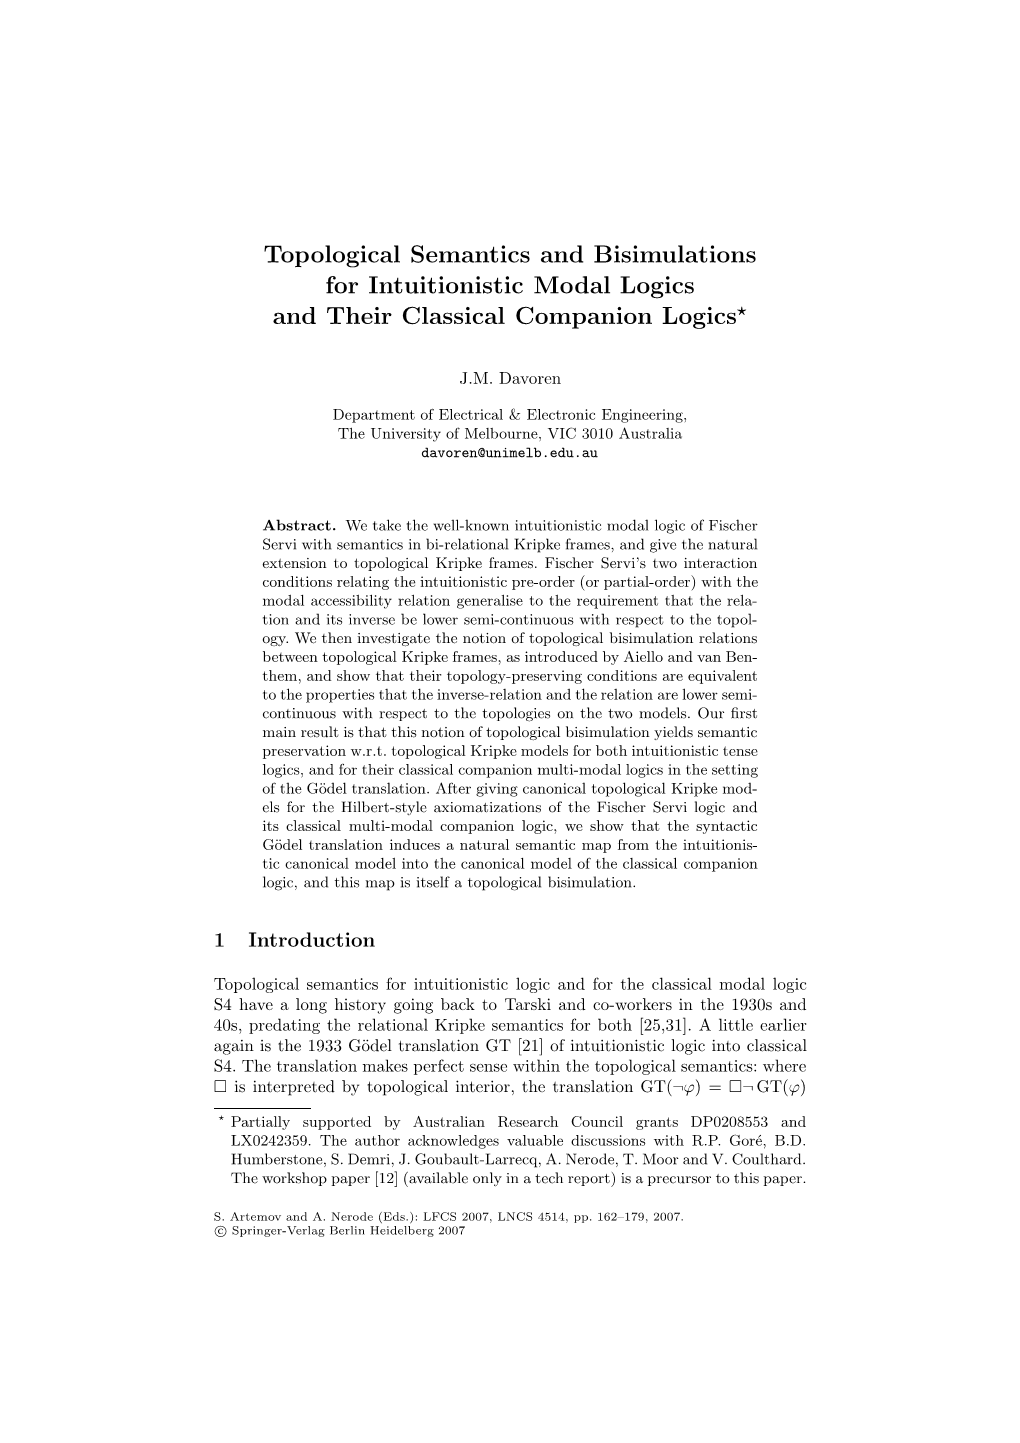 Topological Semantics and Bisimulations for Intuitionistic Modal Logics and Their Classical Companion Logics